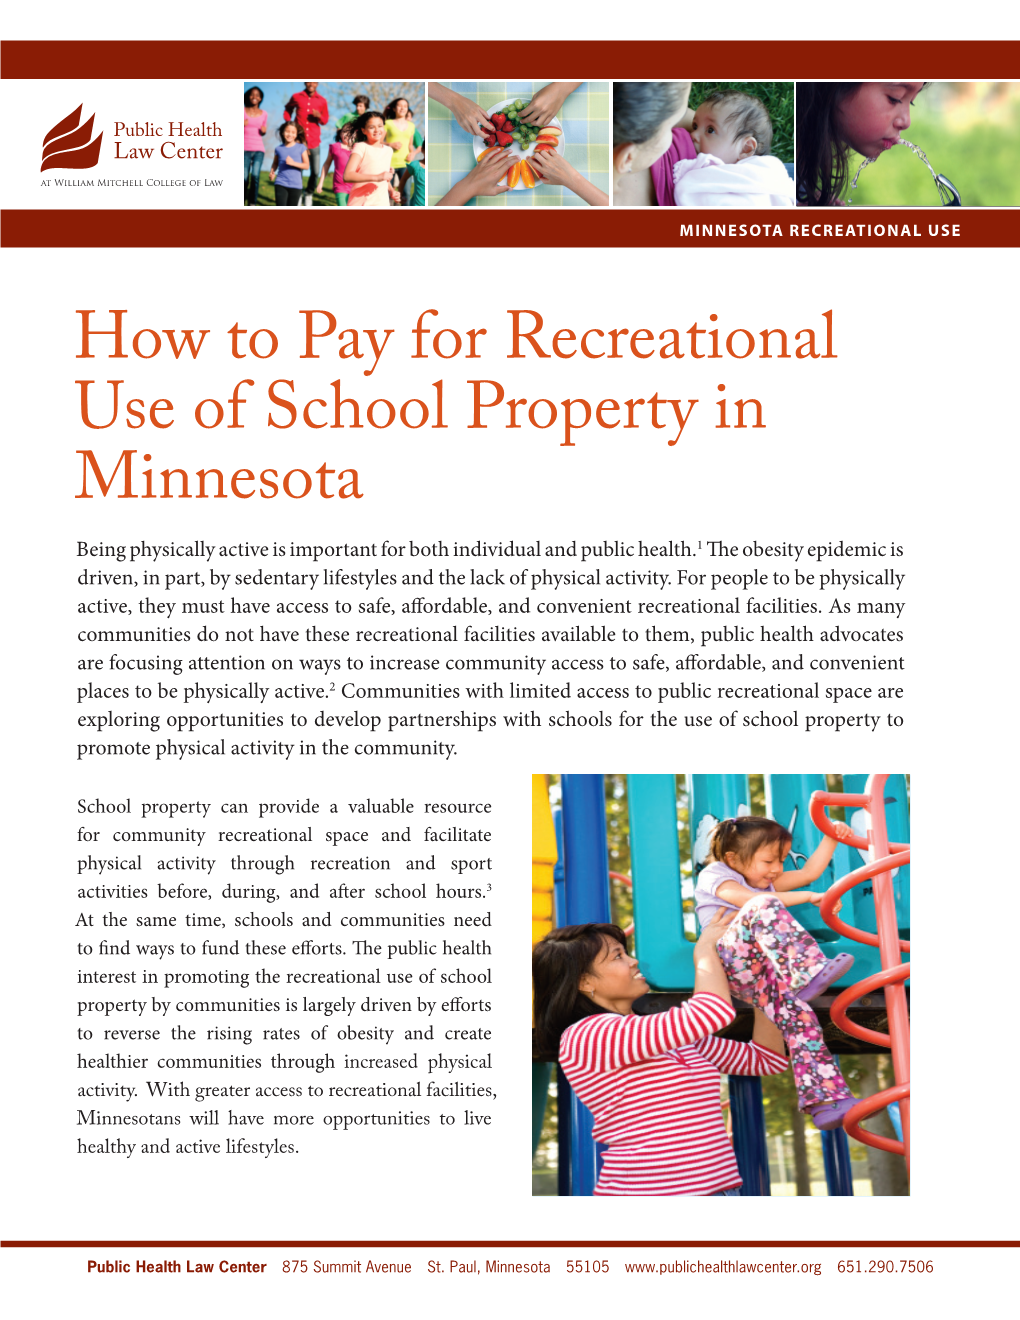 How to Pay for Recreational Use of School Property in Minnesota